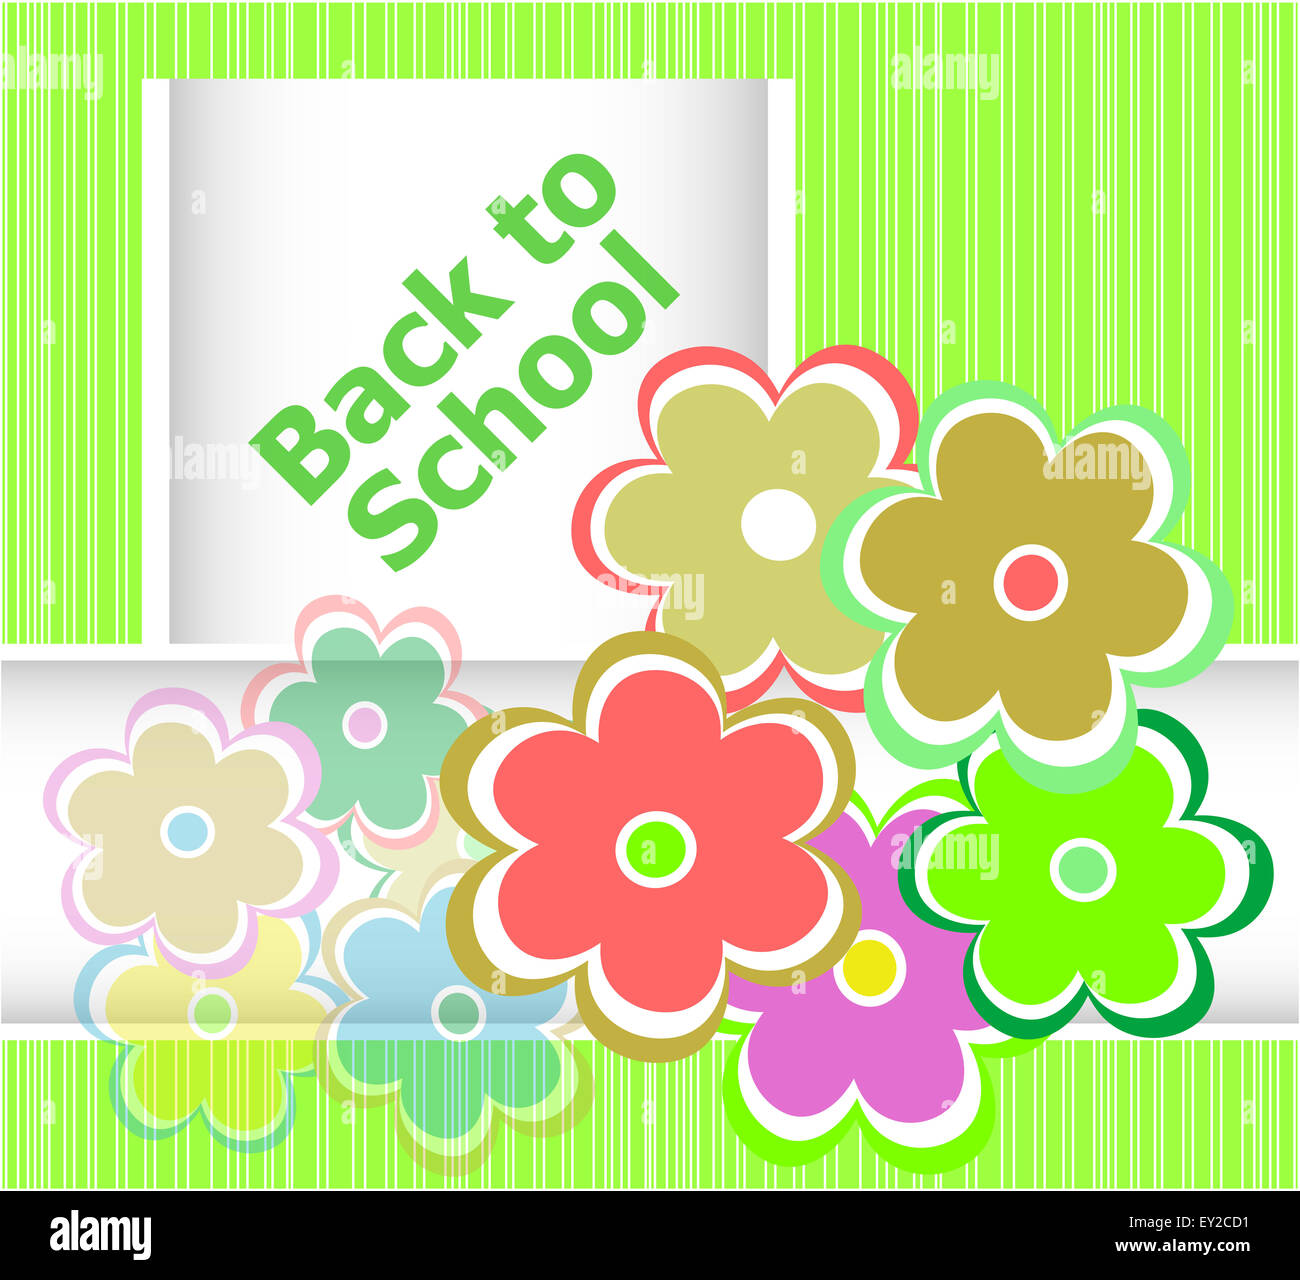 Back to school invitation card with flowers, education concept Stock Photo